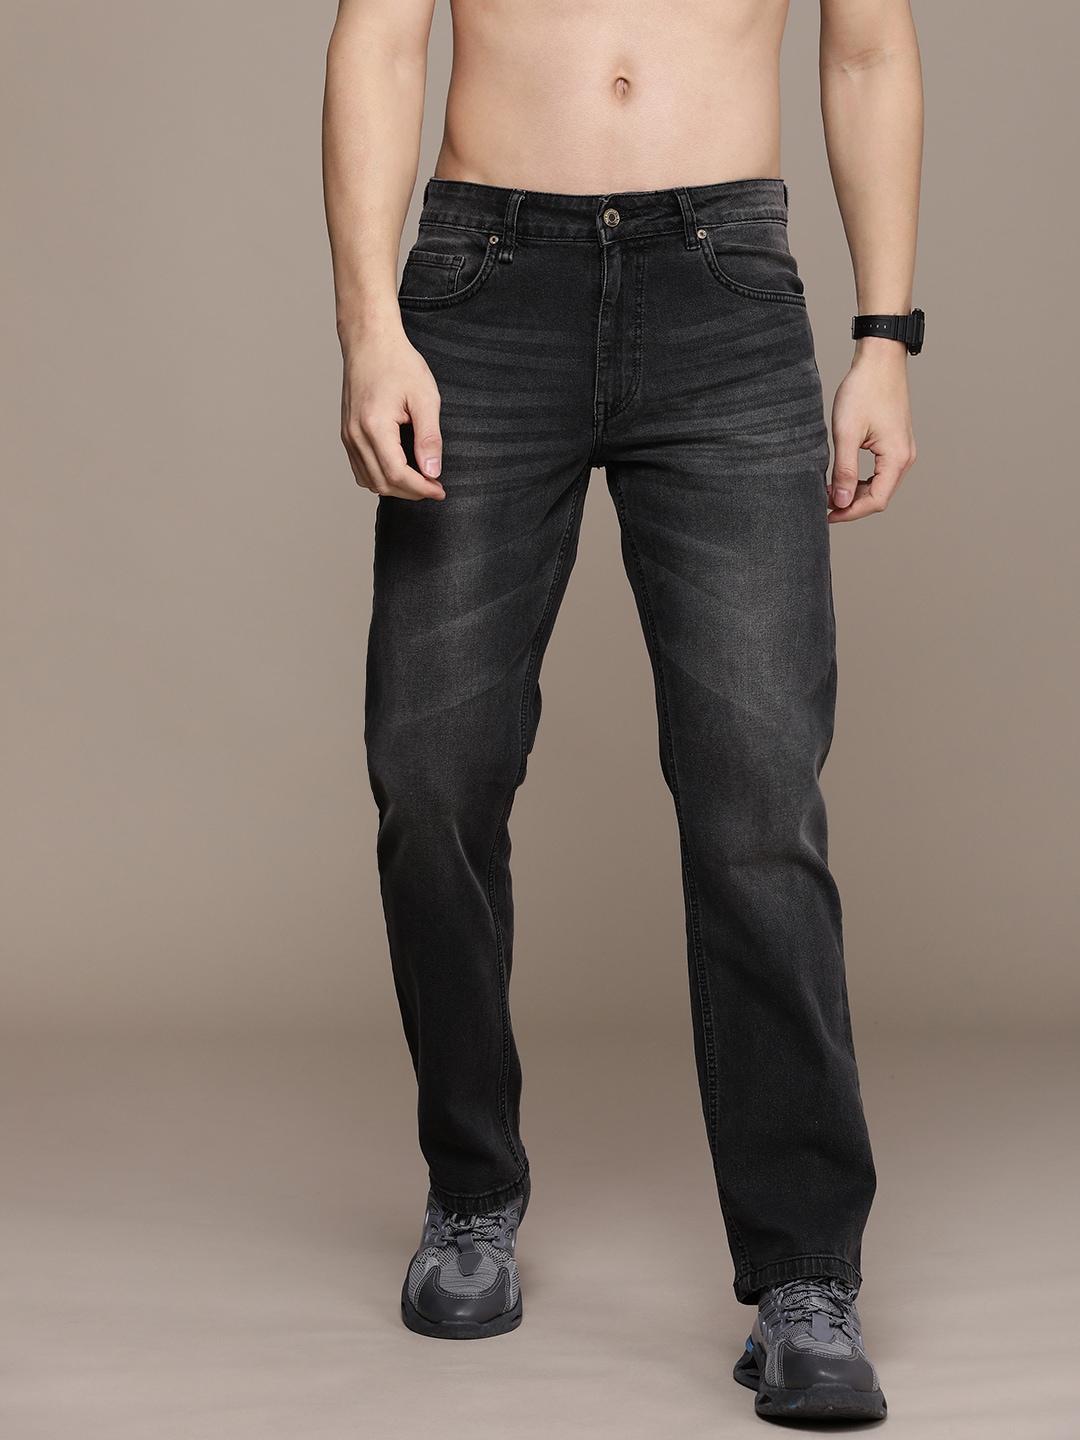 Roadster Men Heavy Fade Stretchable Jeans